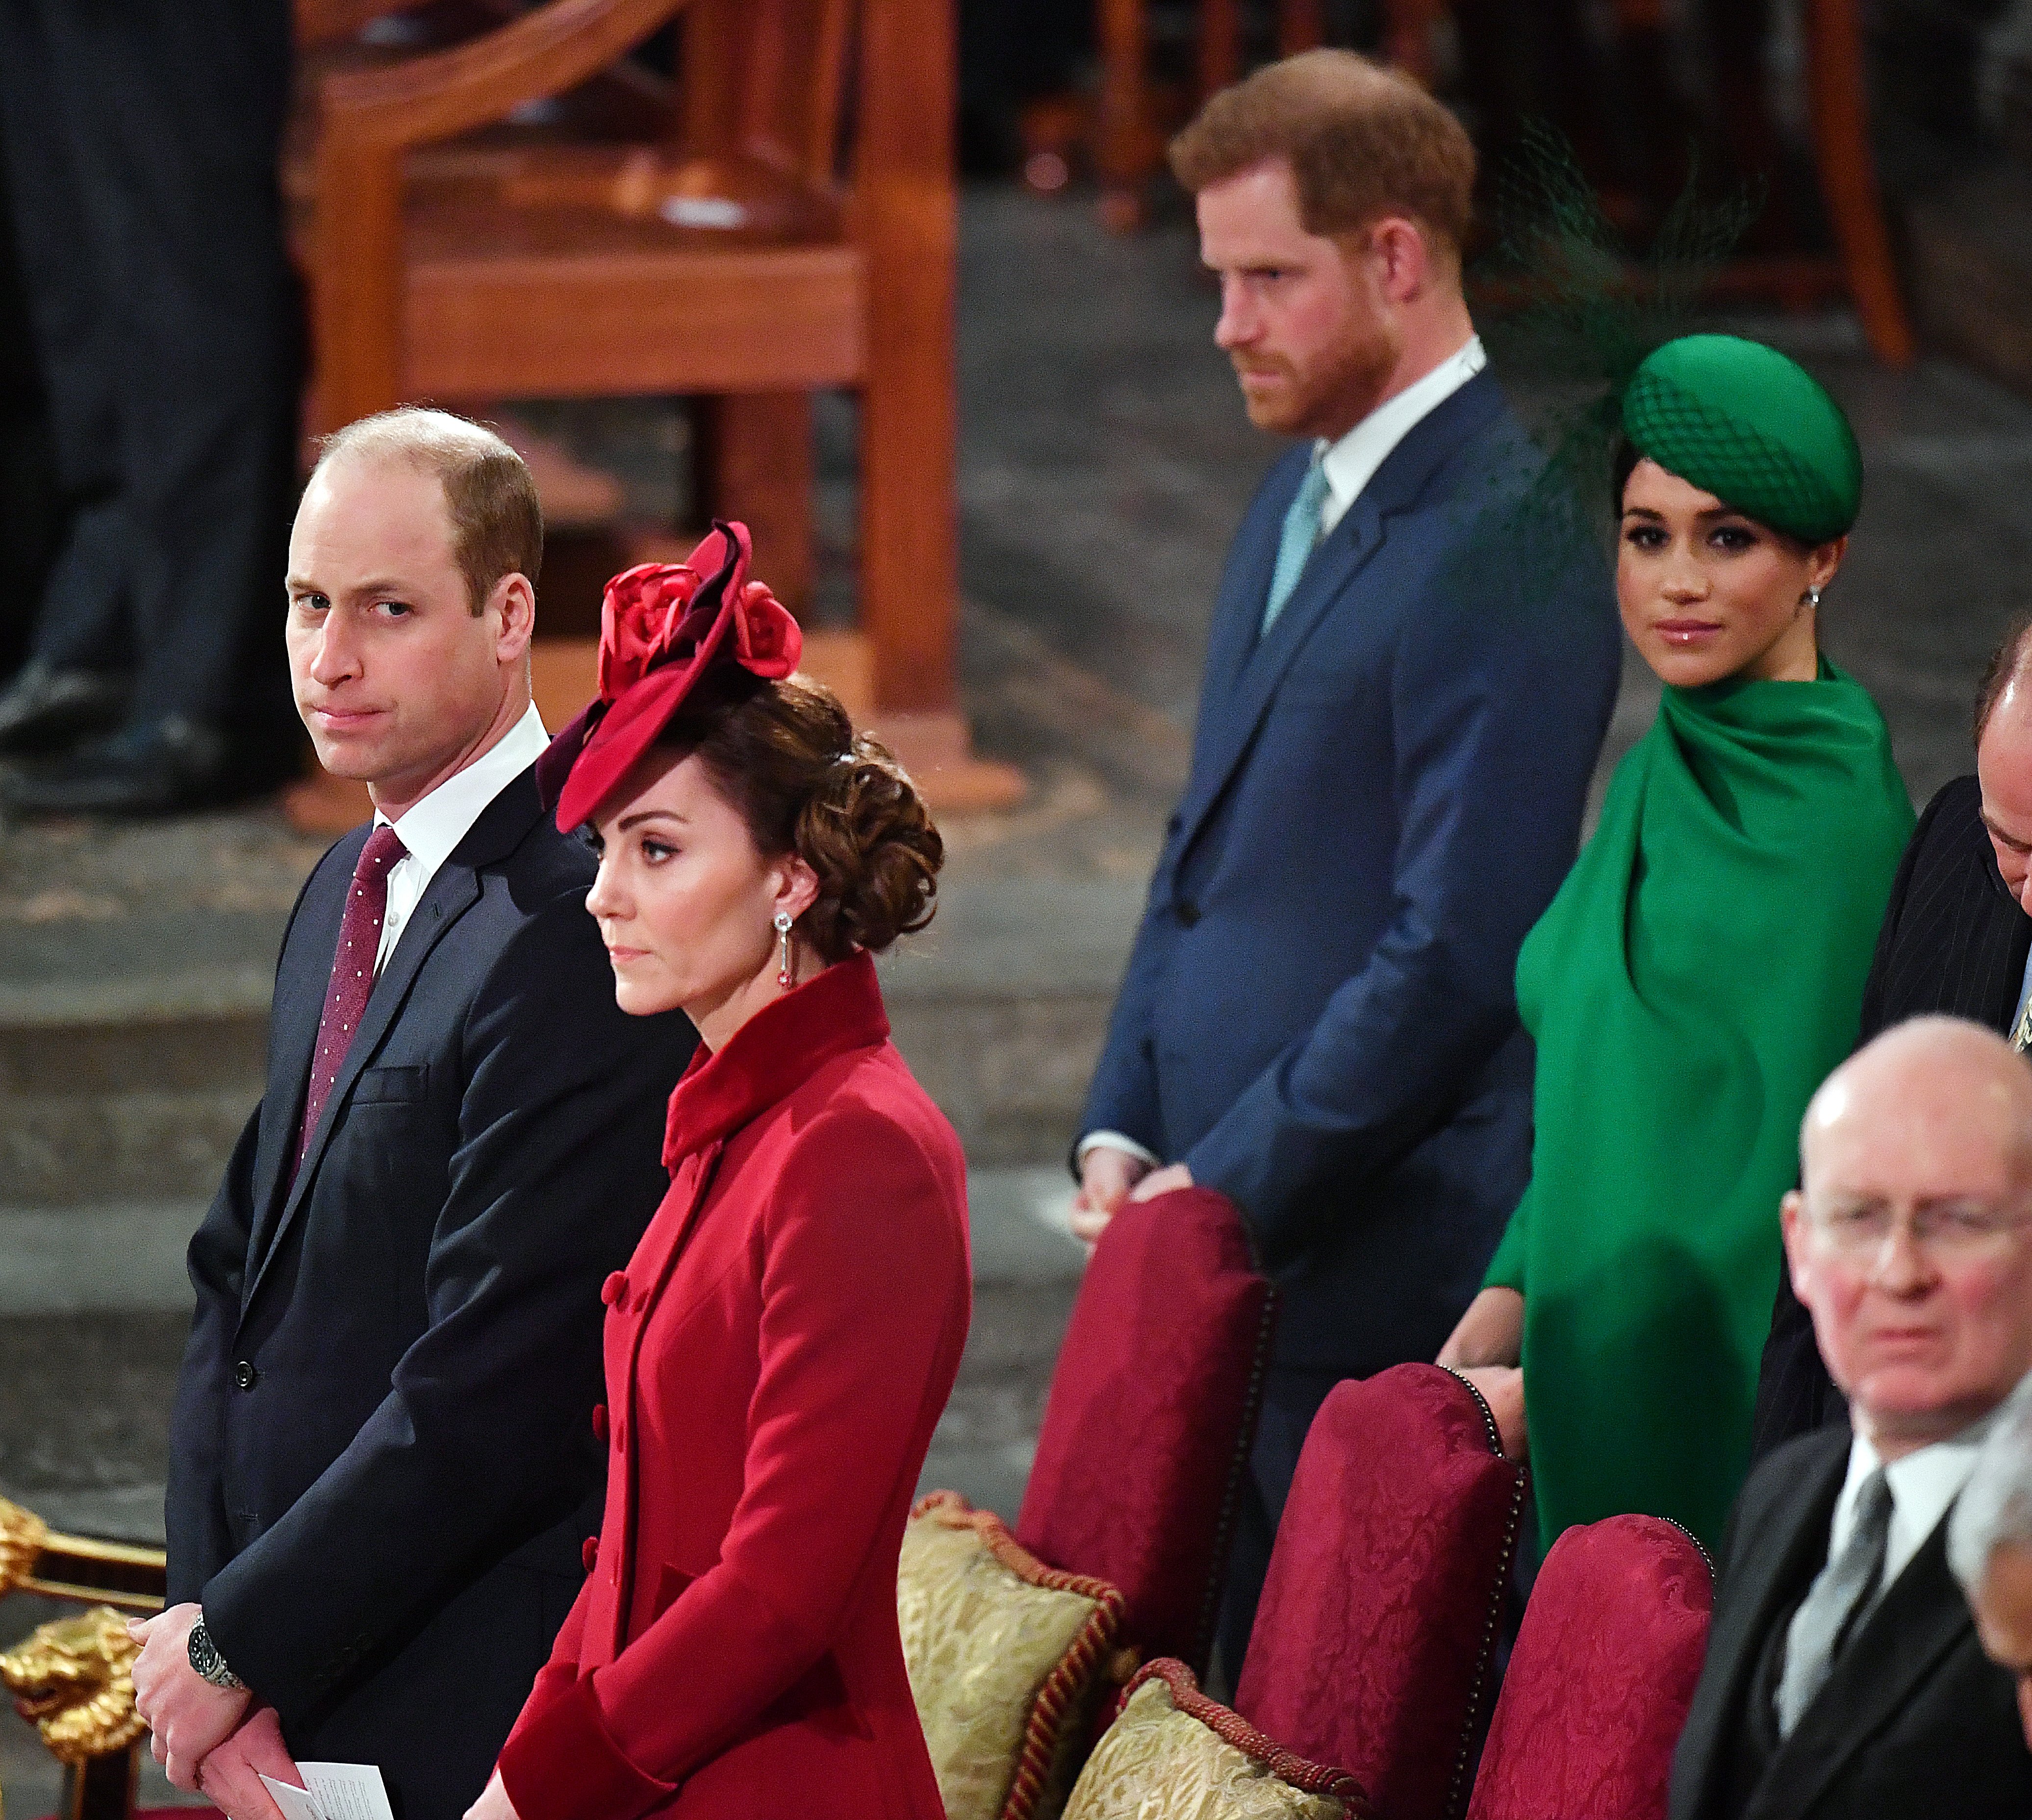 Prince William, Kate Middleton, Prince Harry, and Meghan Markle attend the Commonwealth Day Service 2020 on March 9, 2020 | Photo: Getty Images